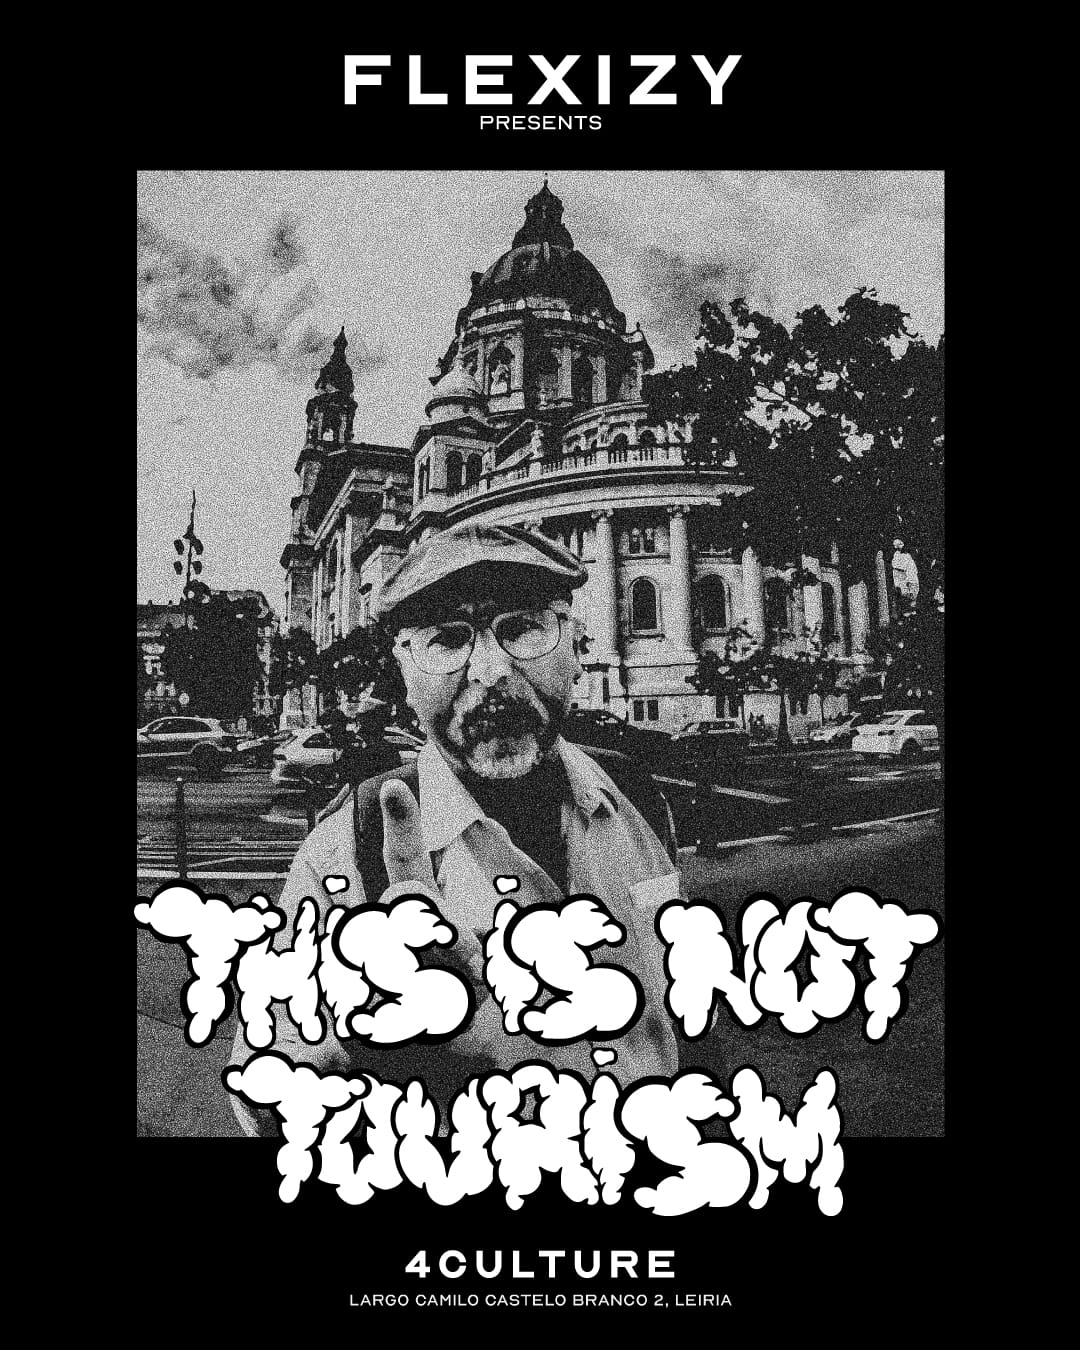 Flexizy Supply – “This Is Not Tourism”